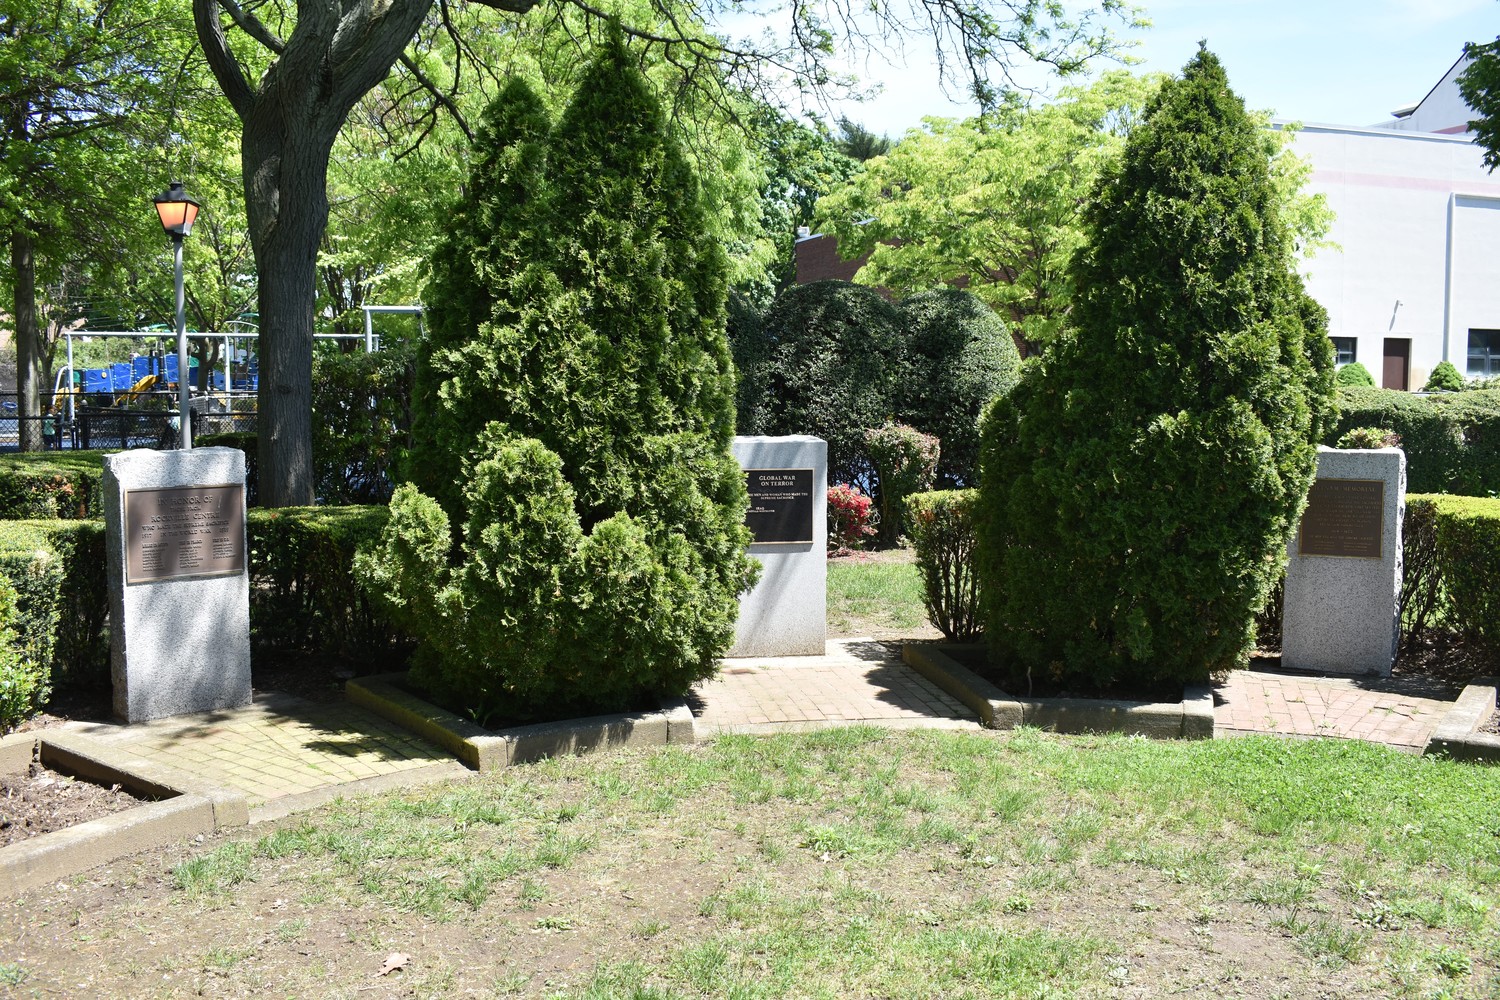 A new World War I monument will be added to the circle of memorials outside the John A. Anderson Recreation Center on May 28 after the village’s Memorial Day Parade.